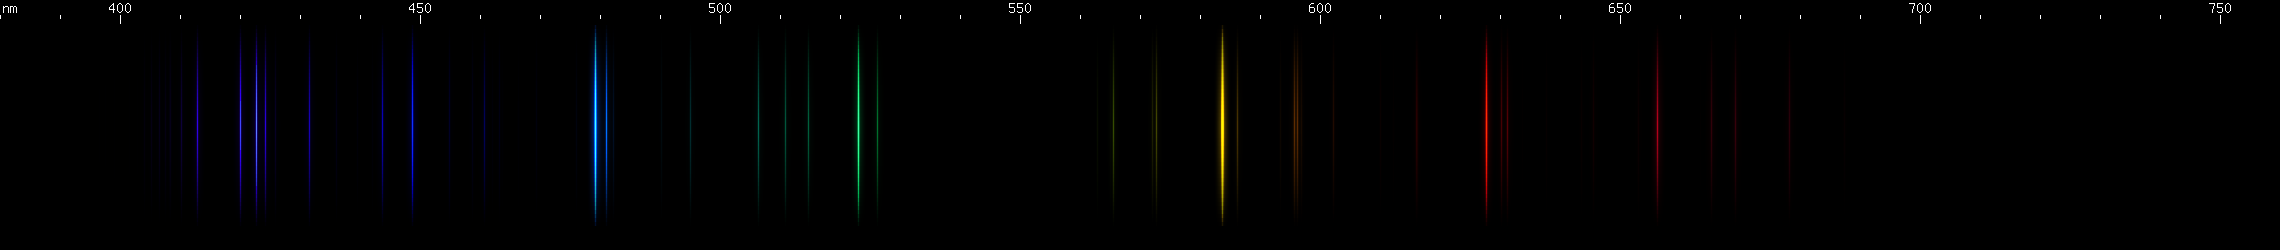 Spectral Lines of Gold